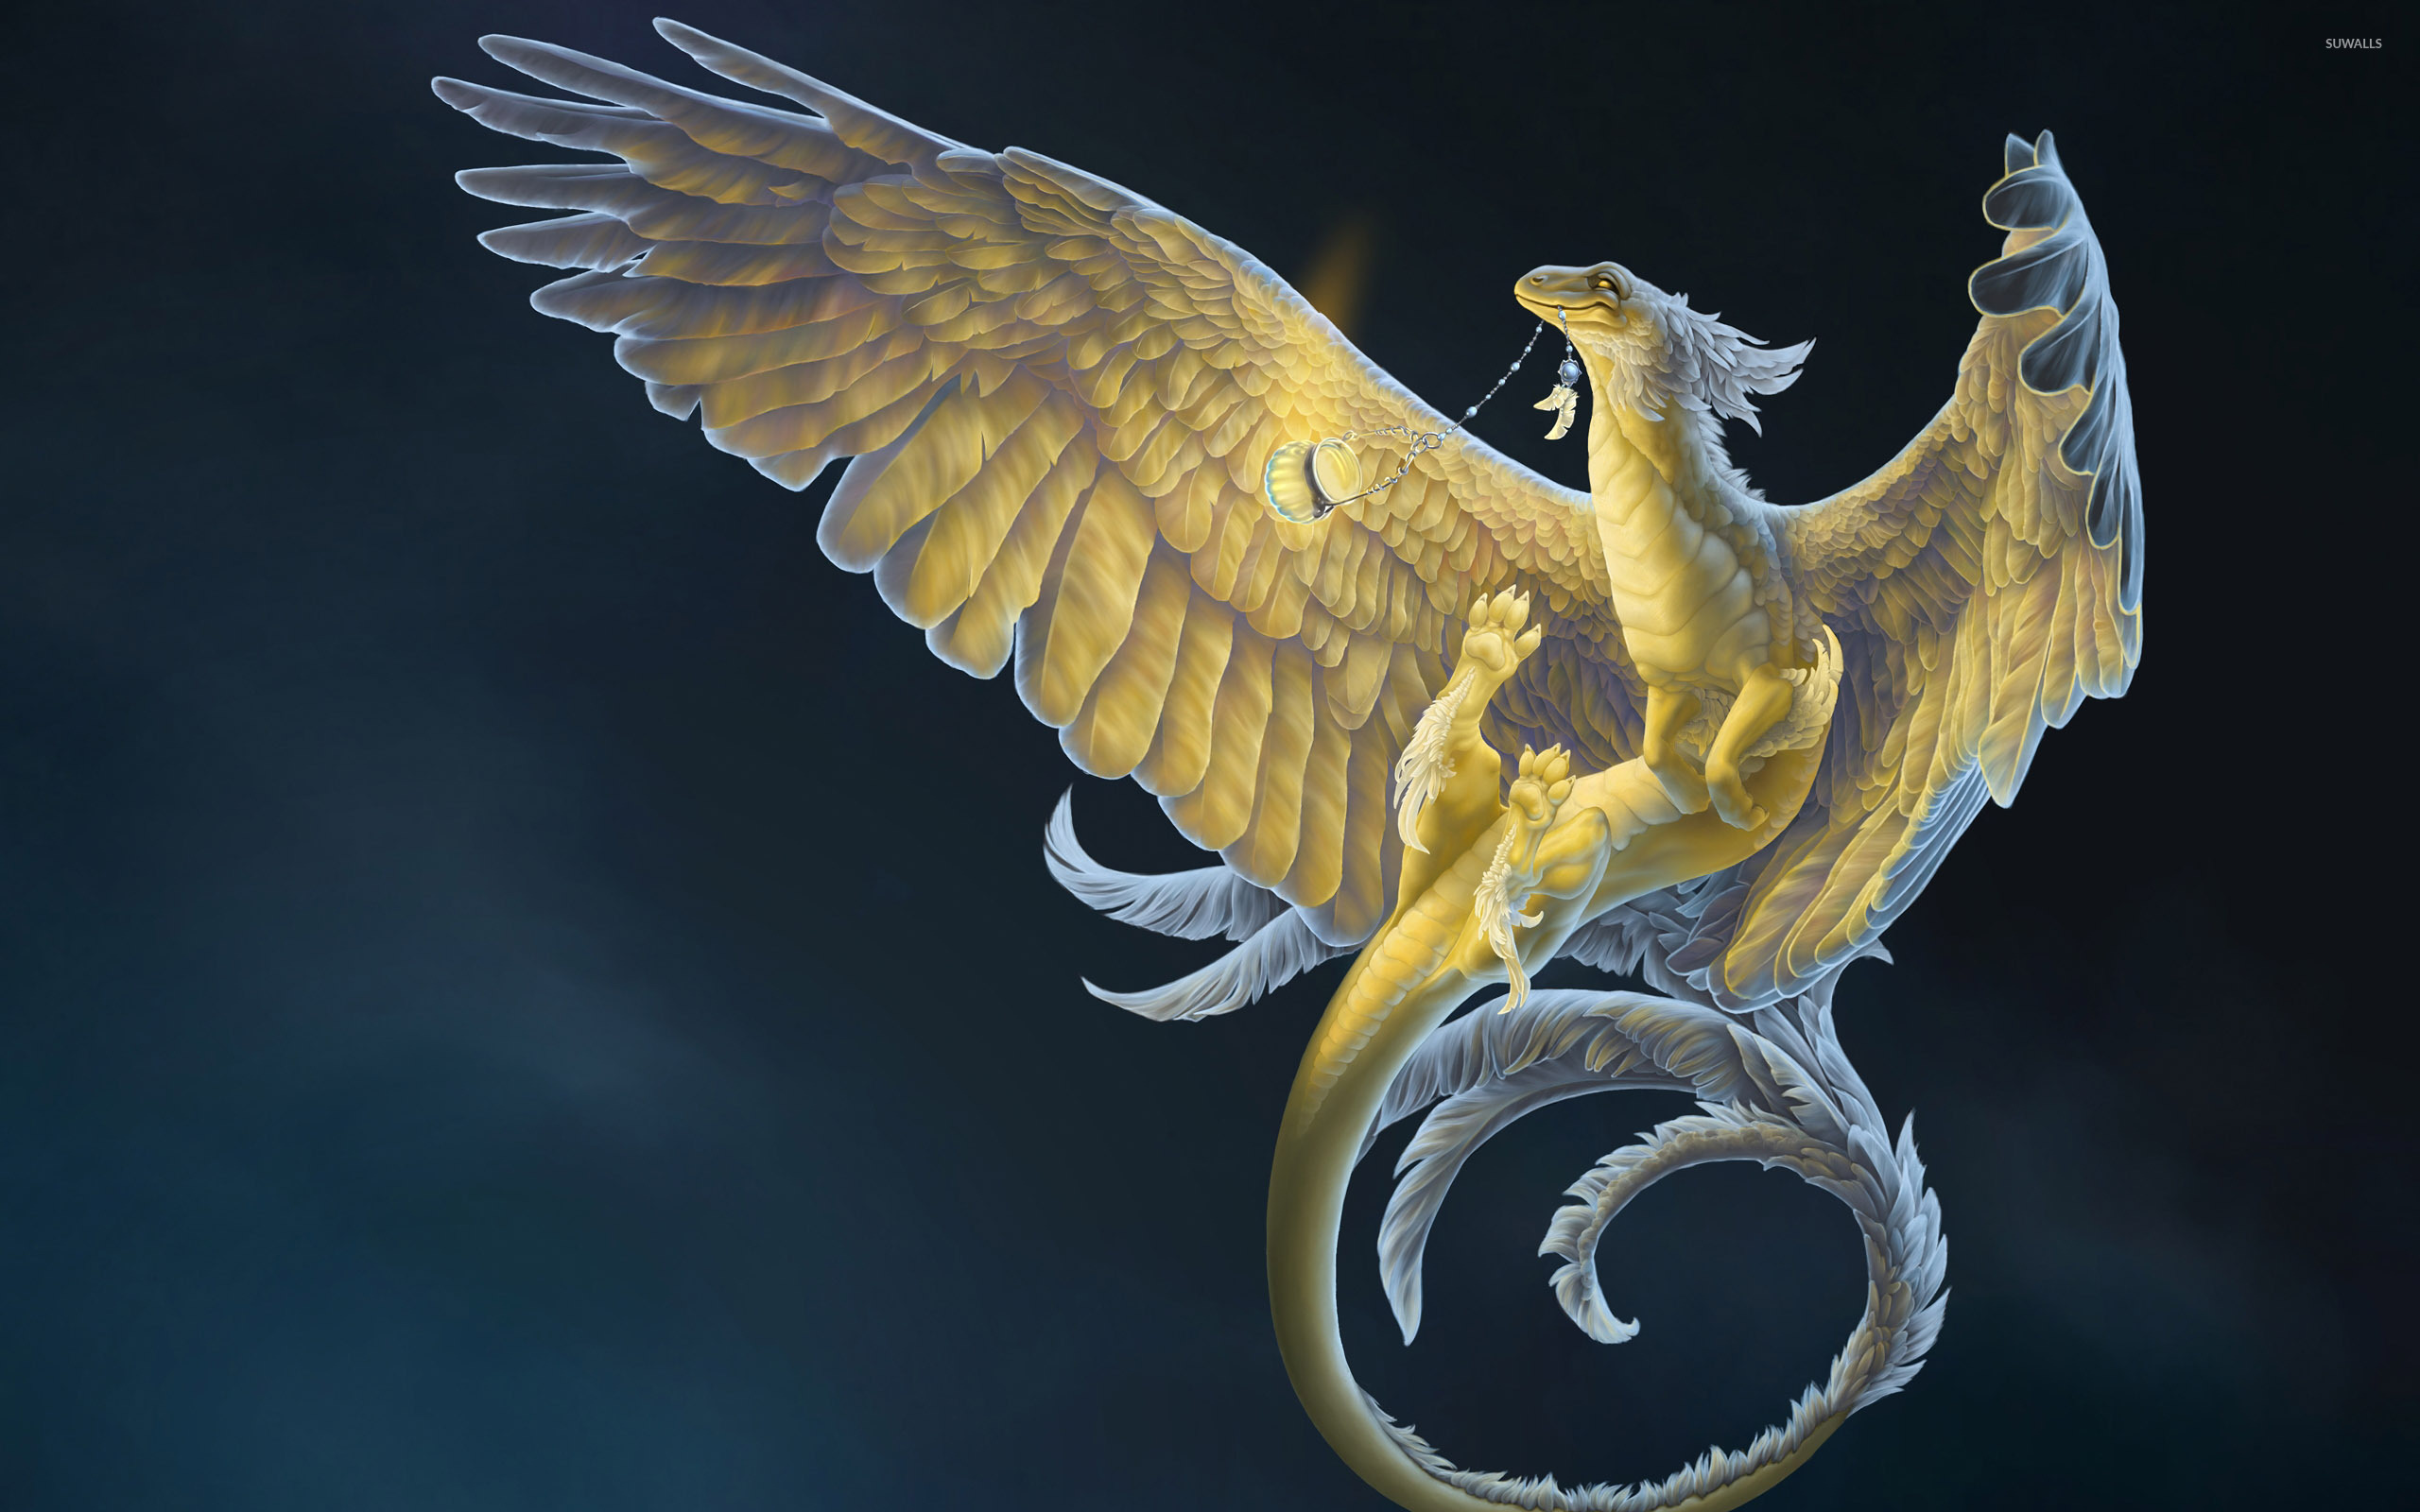 dragon-with-feathers-34168-2560x1600.jpg